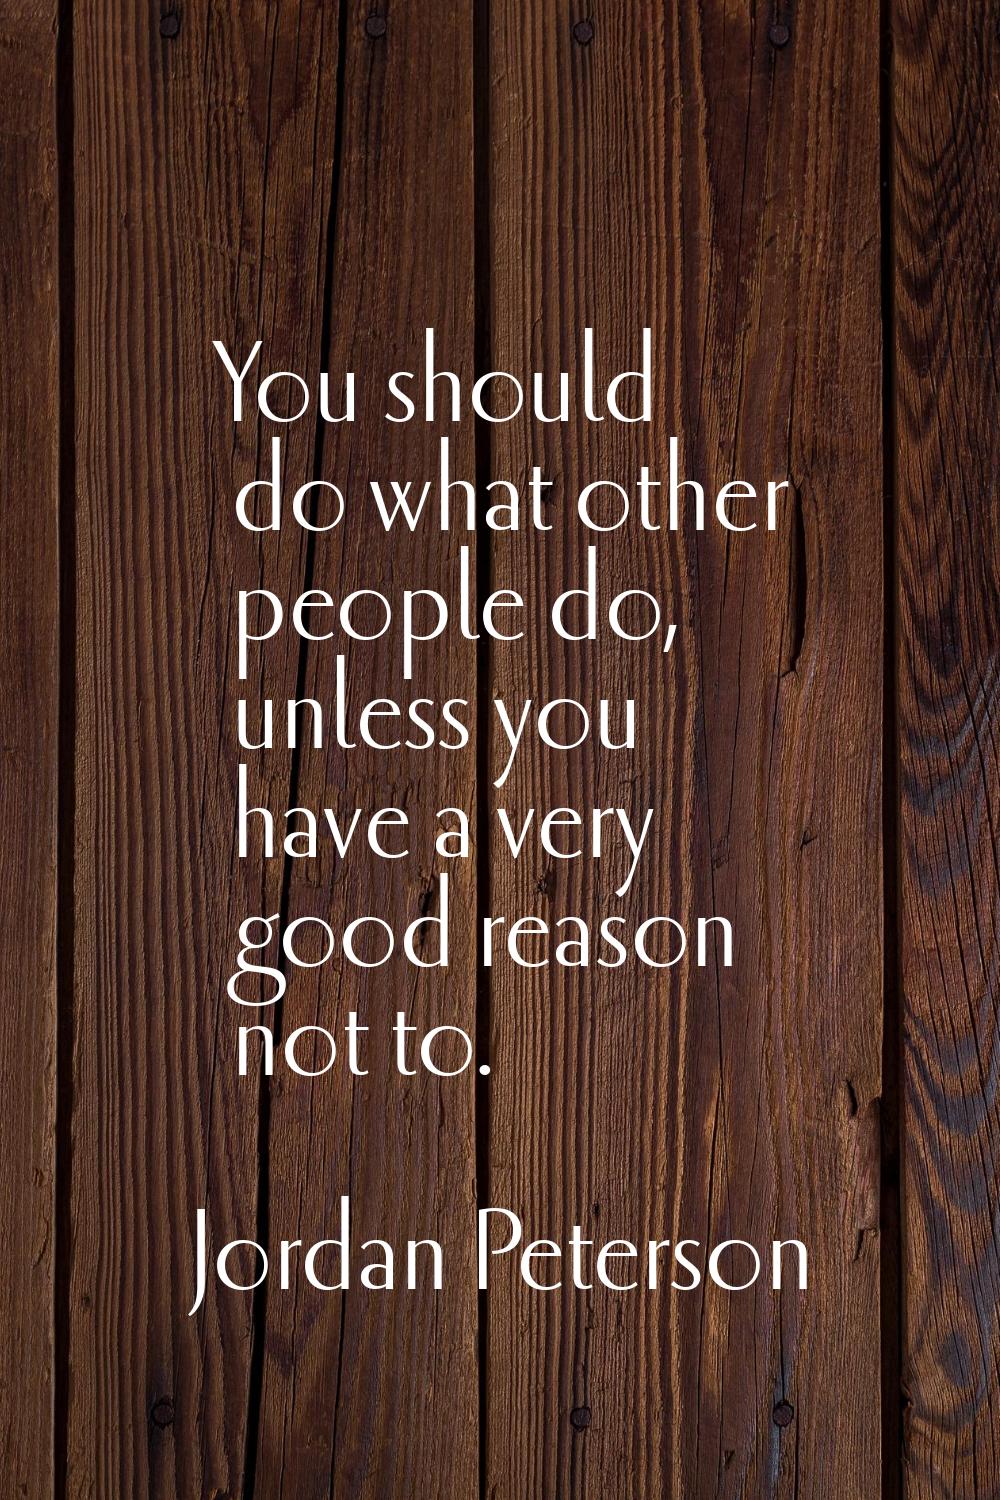 You should do what other people do, unless you have a very good reason not to.